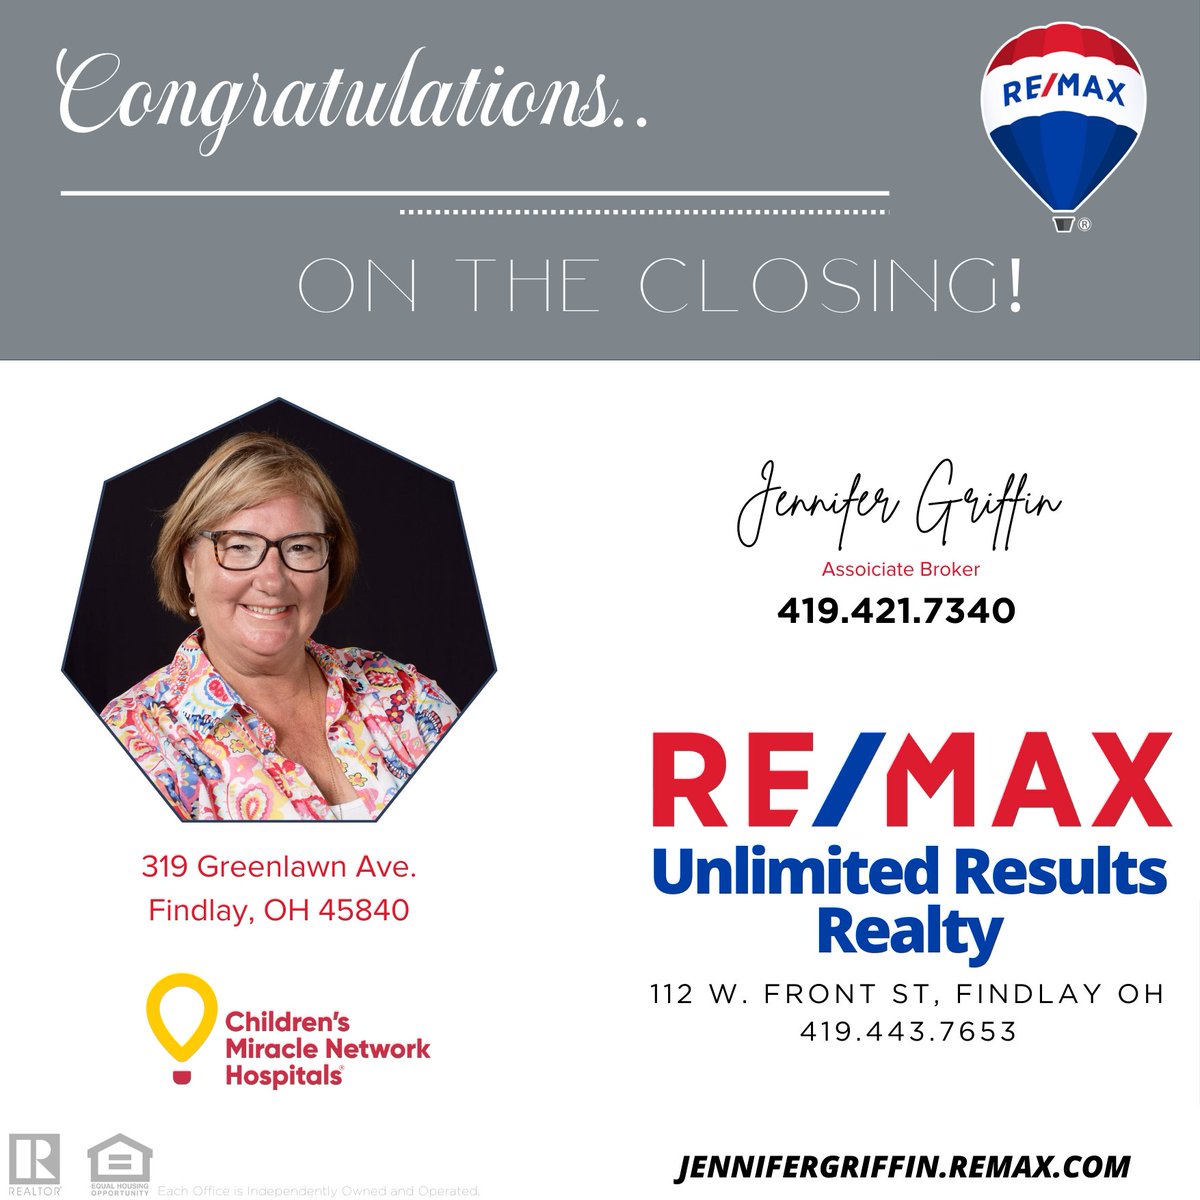 𝗖𝗼𝗻𝗴𝗿𝗮𝘁𝘂𝗹𝗮𝘁𝗶𝗼𝗻𝘀, 𝗝𝗲𝗻𝗻𝗶𝗳𝗲𝗿 on your CLOSING! 👏🎉🎊

If you are looking for an Agent to represent you, visit her website at: JenniferGriffin.Remax.com

#realestate #remax #remaxagent #CMN #northwestohio #ohiorealestate #sold #closing